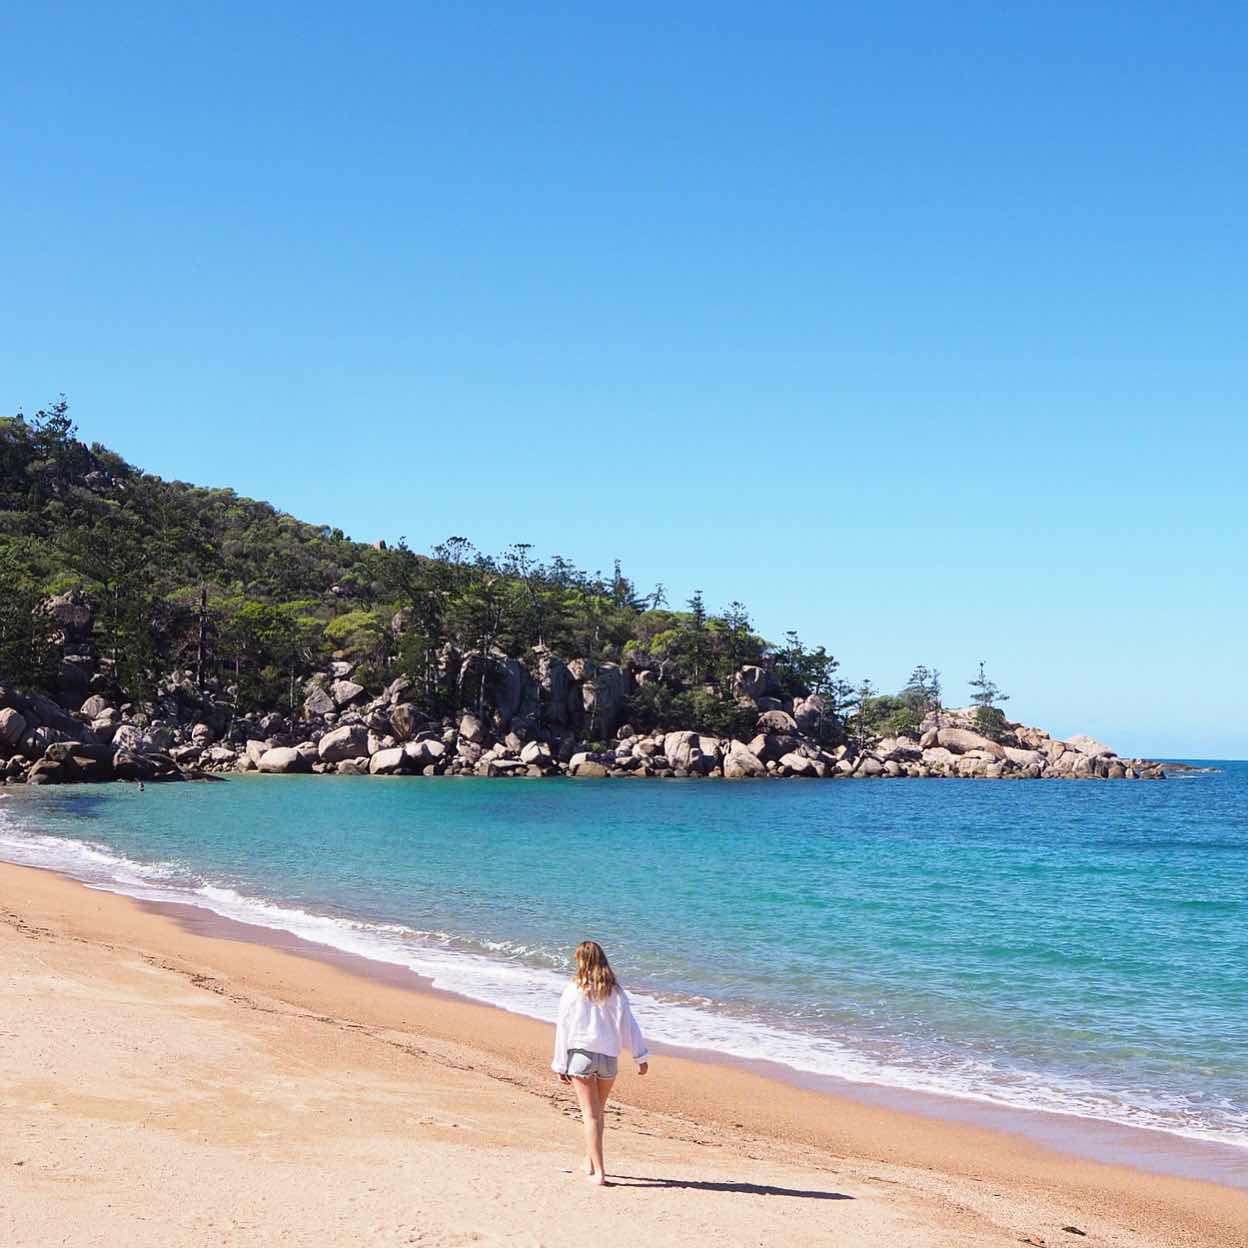 OUR FIRST WEEK LIVING ON MAGNETIC ISLAND